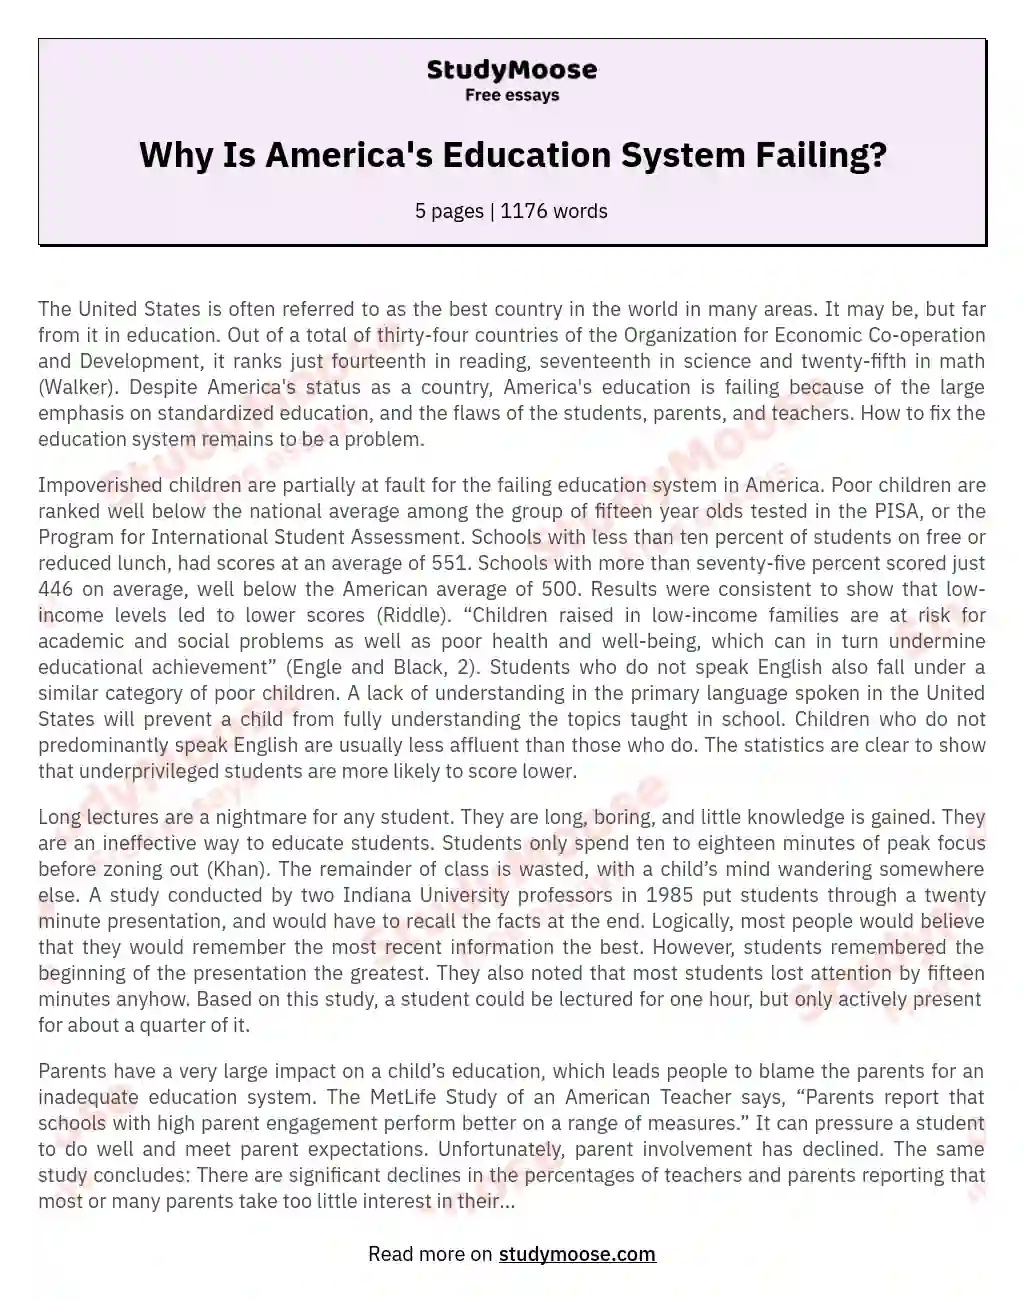 Why Is America's Education System Failing? essay